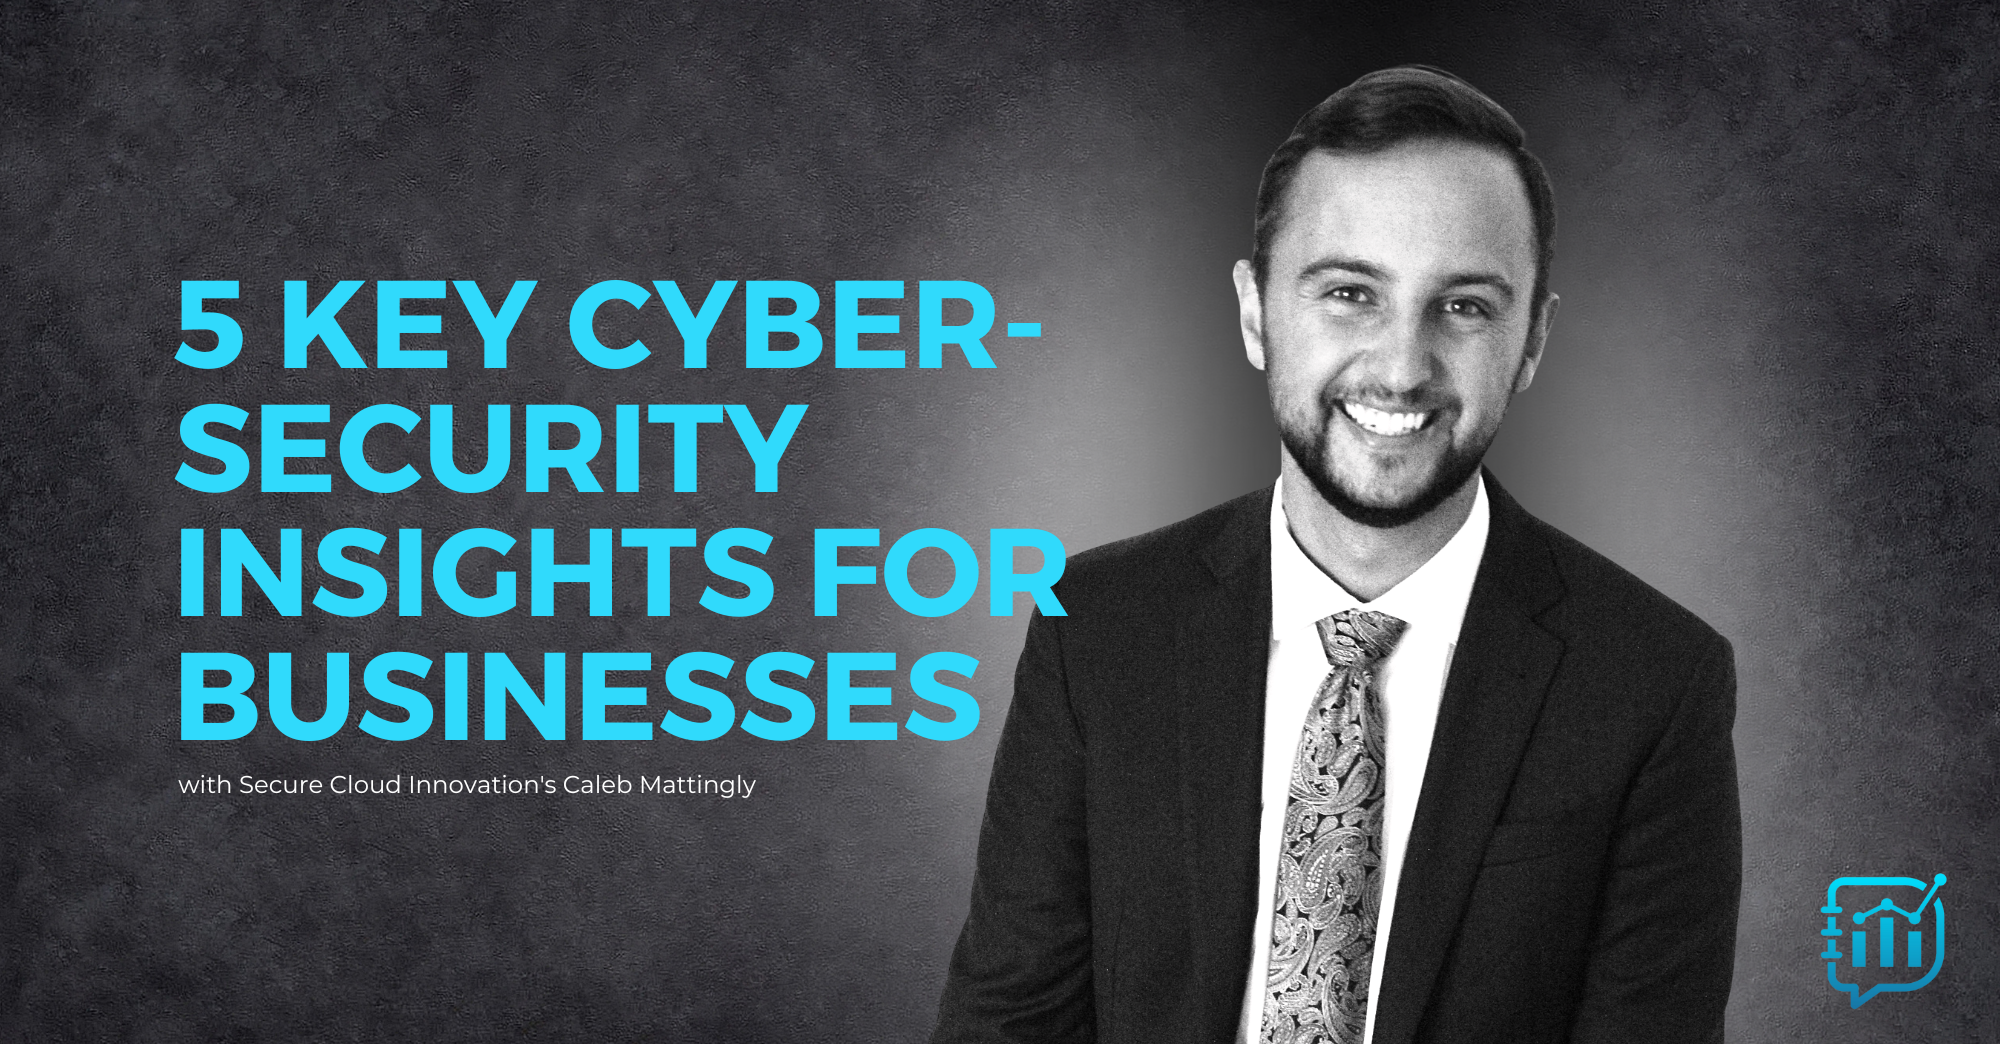 image of Caleb Mattingly and title "5 Key Cybersecurity Insights for Businesses"